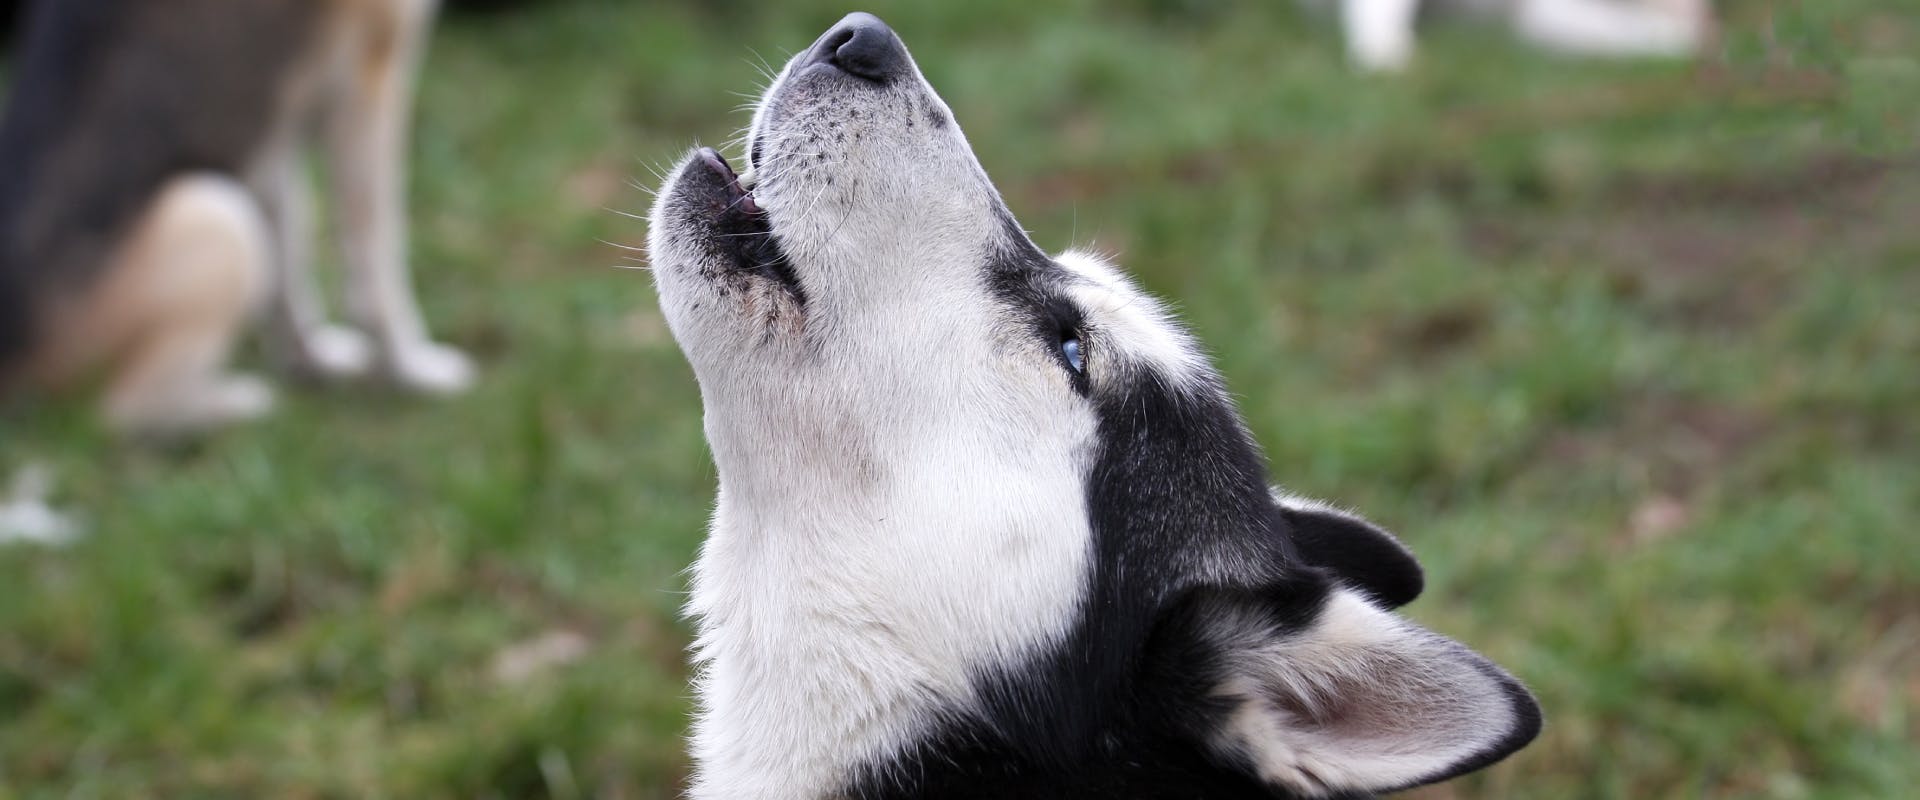 a close up of a husky's face in a park while it howls